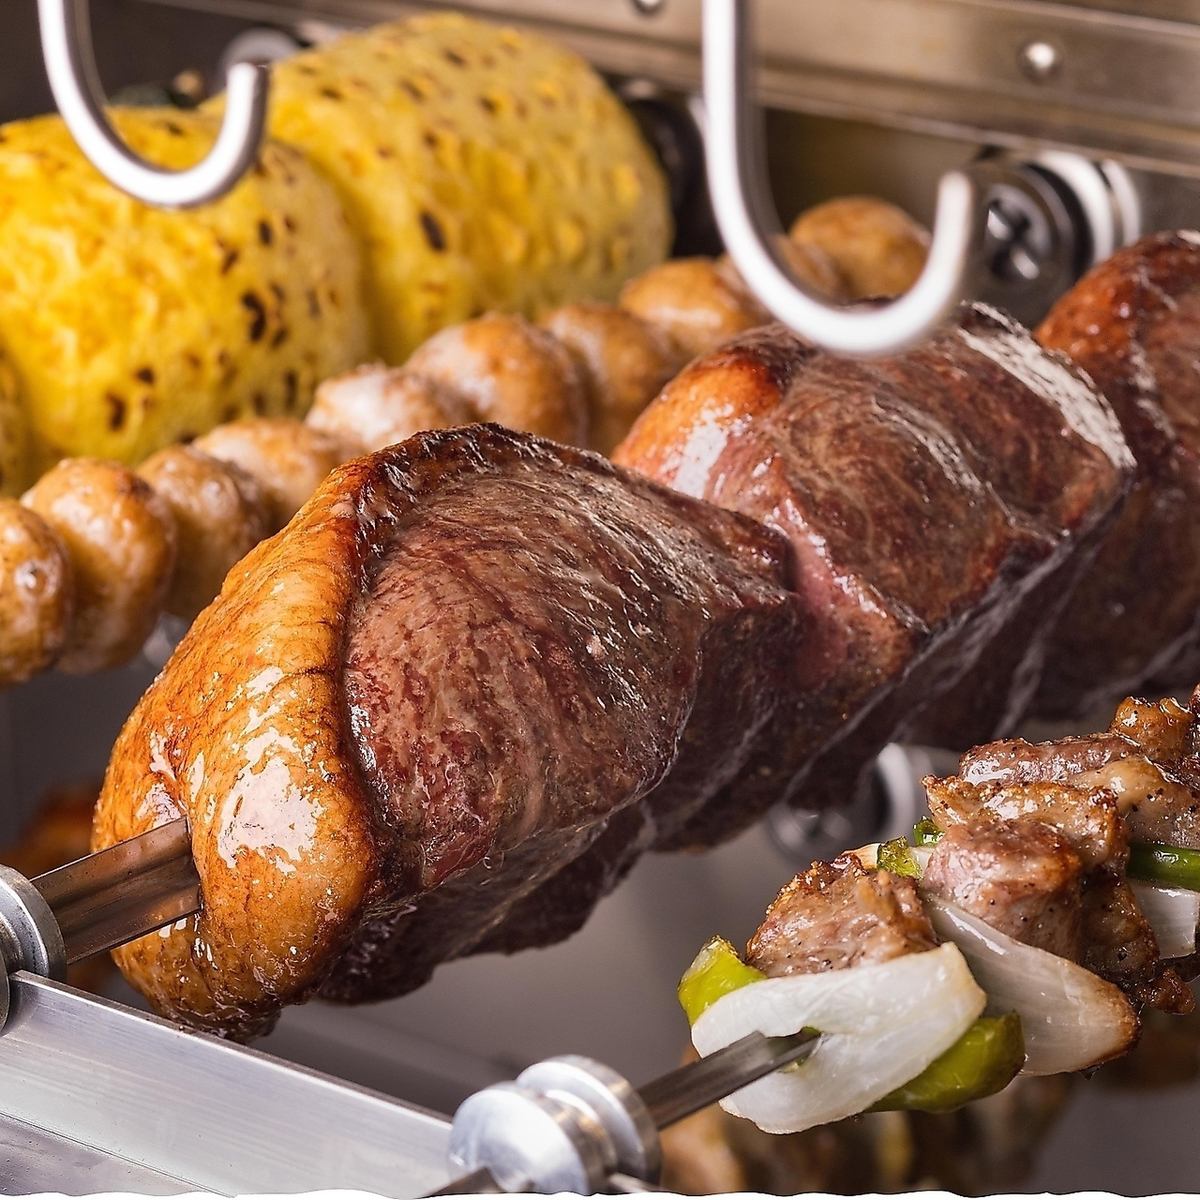 ★All-you-can-eat 15 types of Churrasco! Enjoy the hearty chunks of meat♪